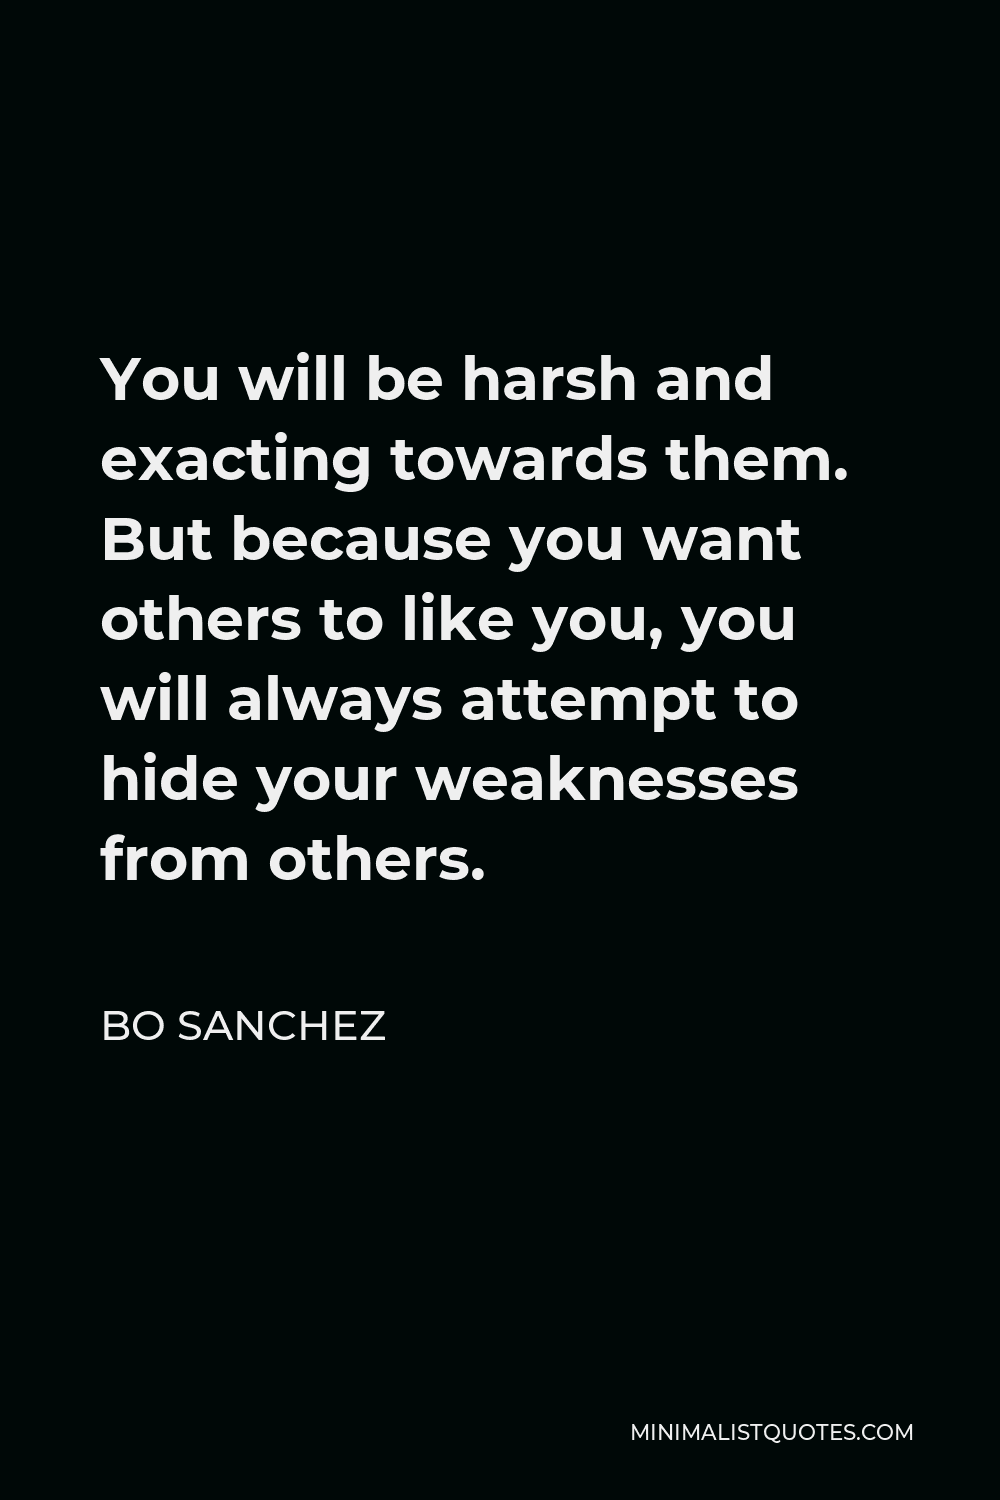 Bo Sanchez Quote - You will be harsh and exacting towards them. But because you want others to like you, you will always attempt to hide your weaknesses from others.